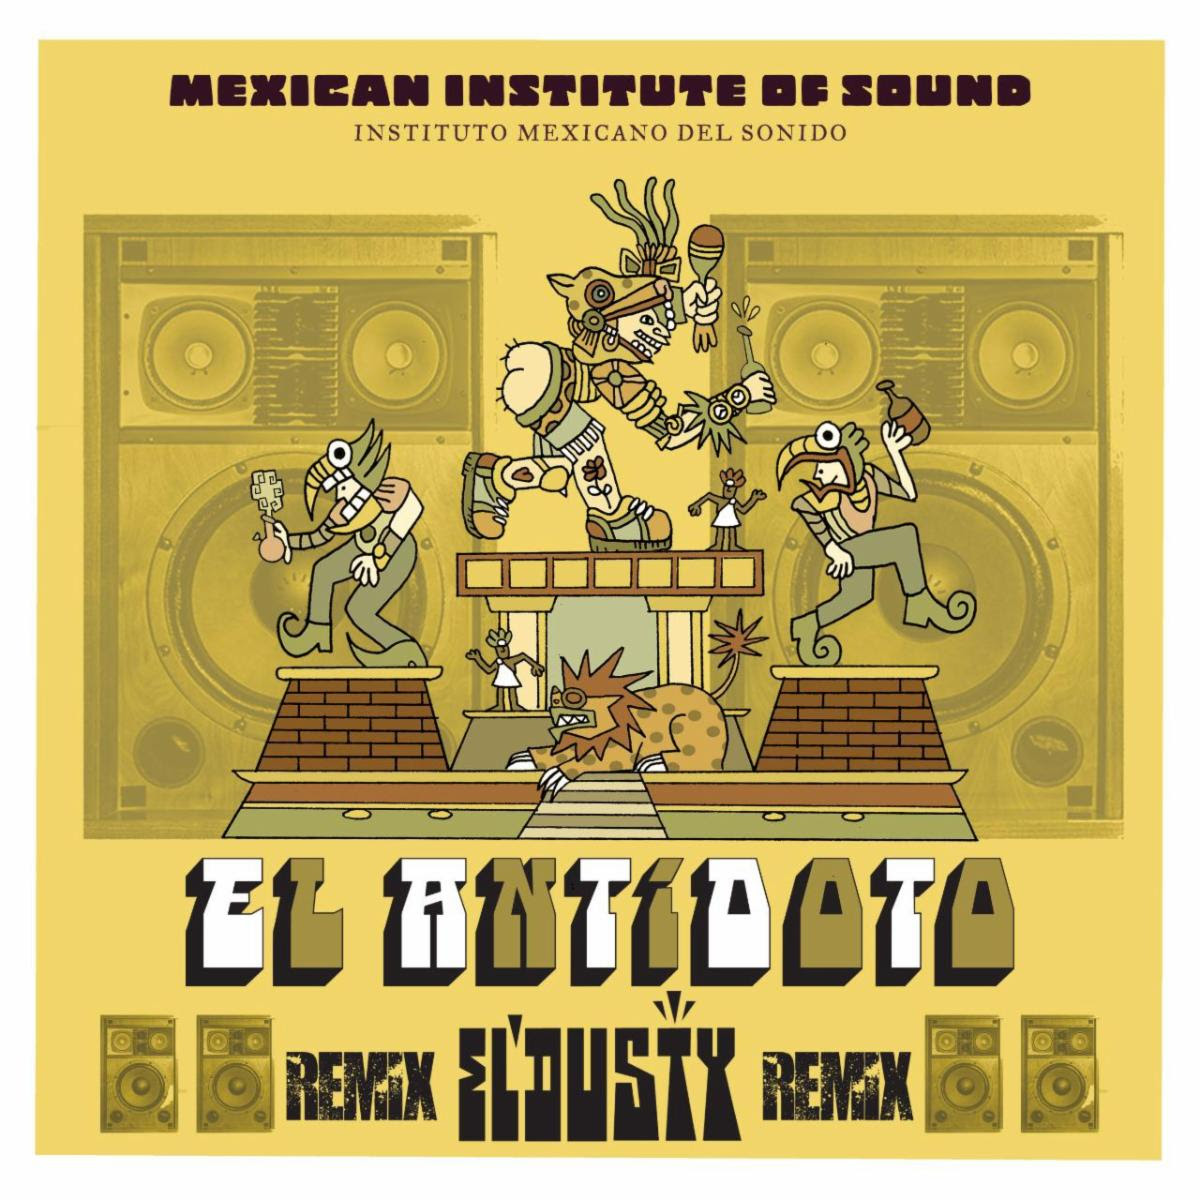 news.estereofonica.com el antidoto mexican institute of sounds latest single remixed by el dusty ims unnamed